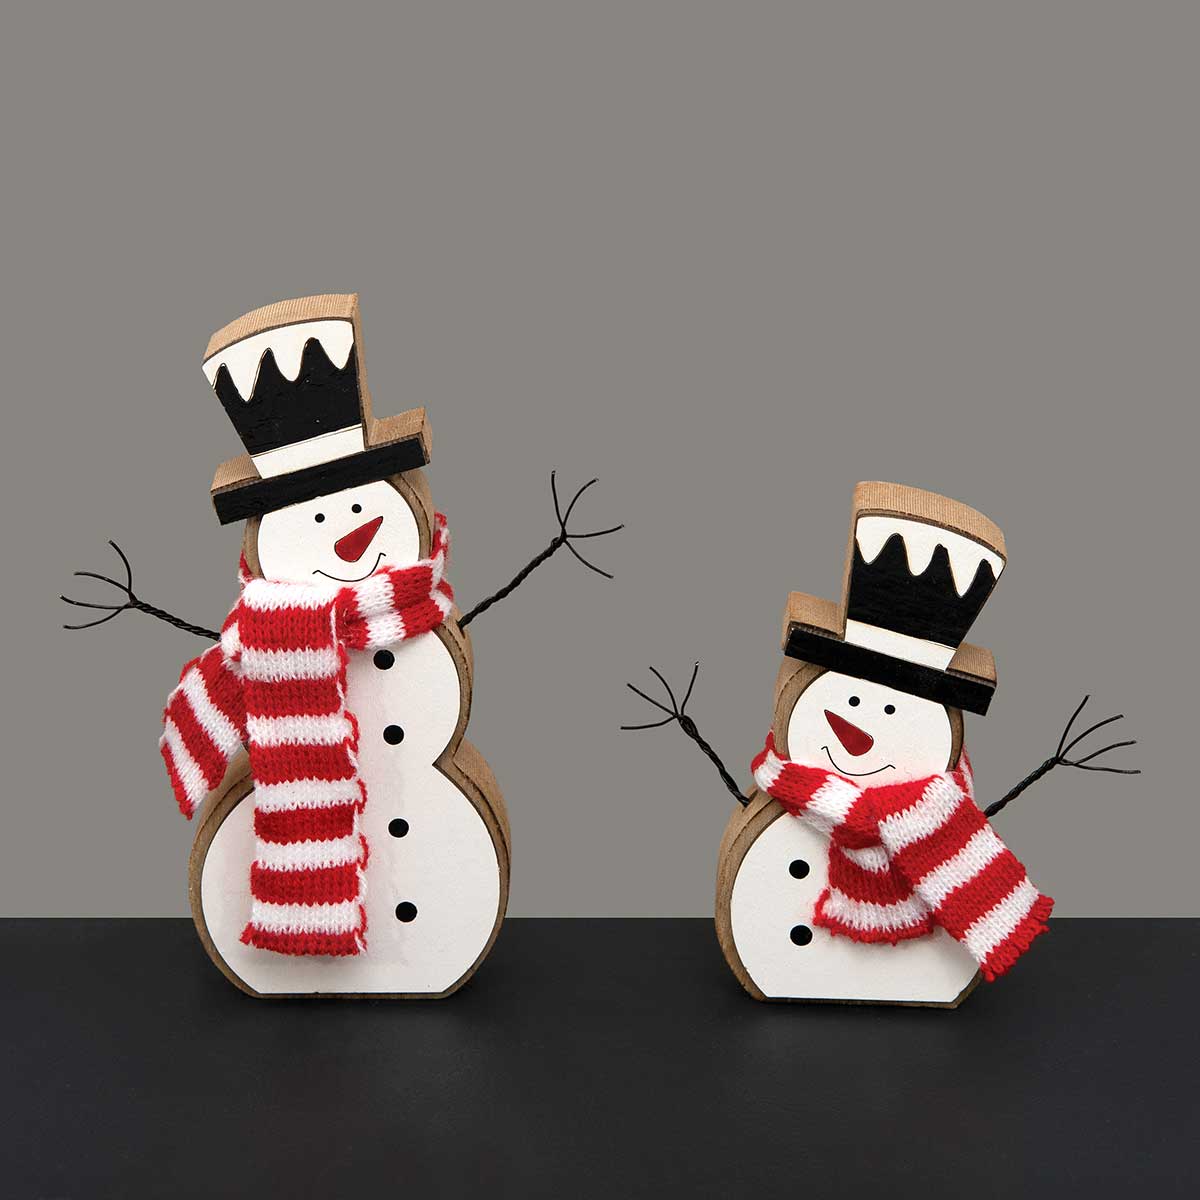 SIT-A-BOUT SNOWMAN SMALL 4.5IN X 1IN X 4.5IN WHITE/RED/BLACK - Click Image to Close